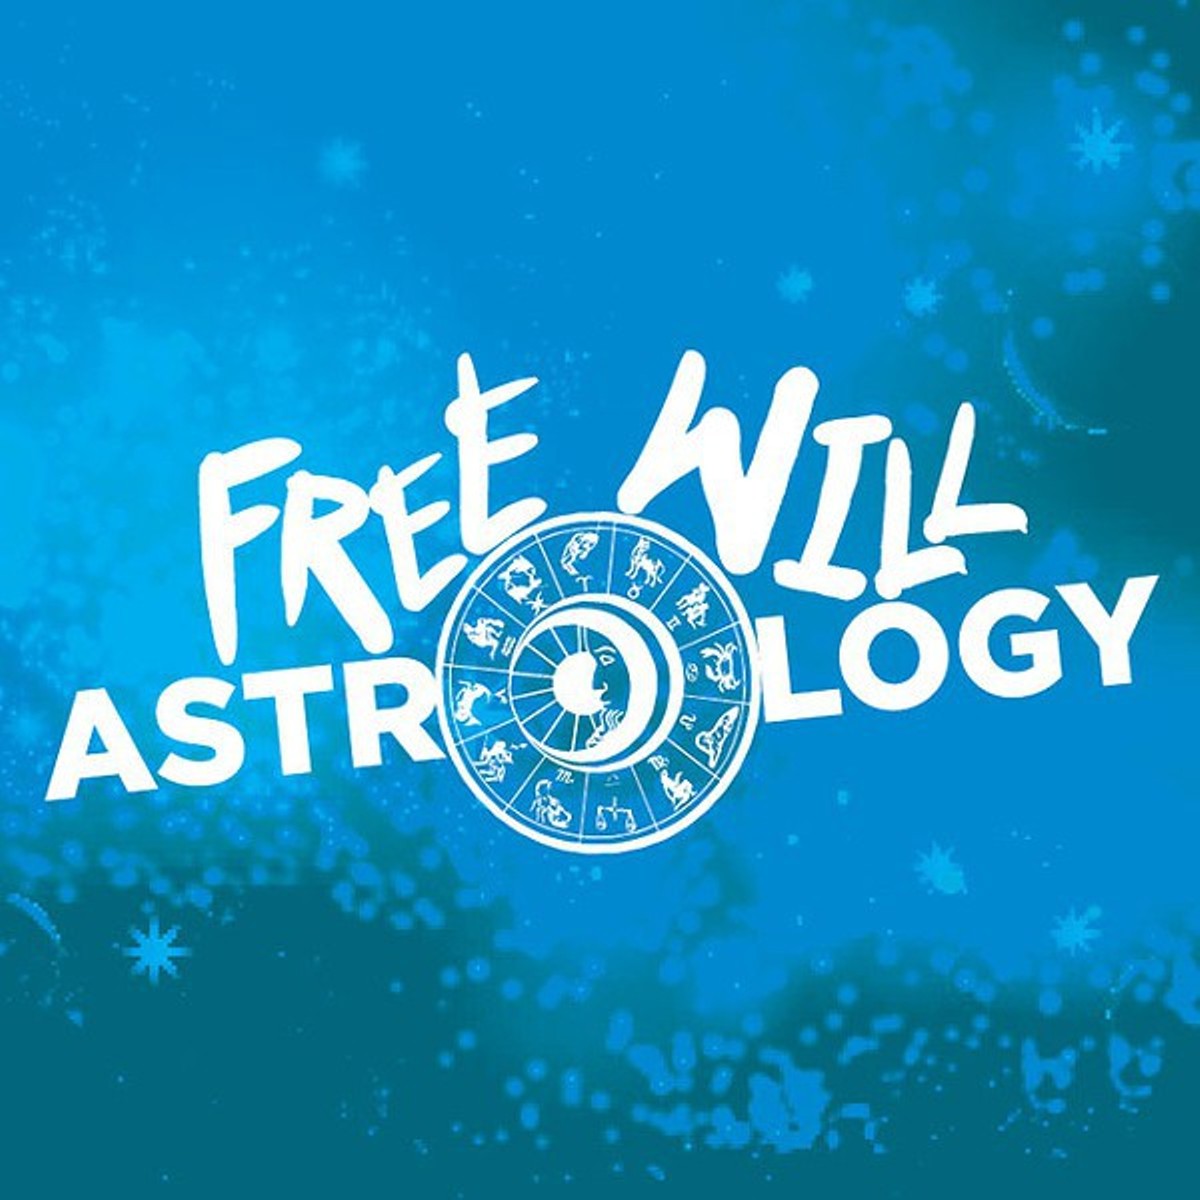 Free Will Astrology (8/26/15)